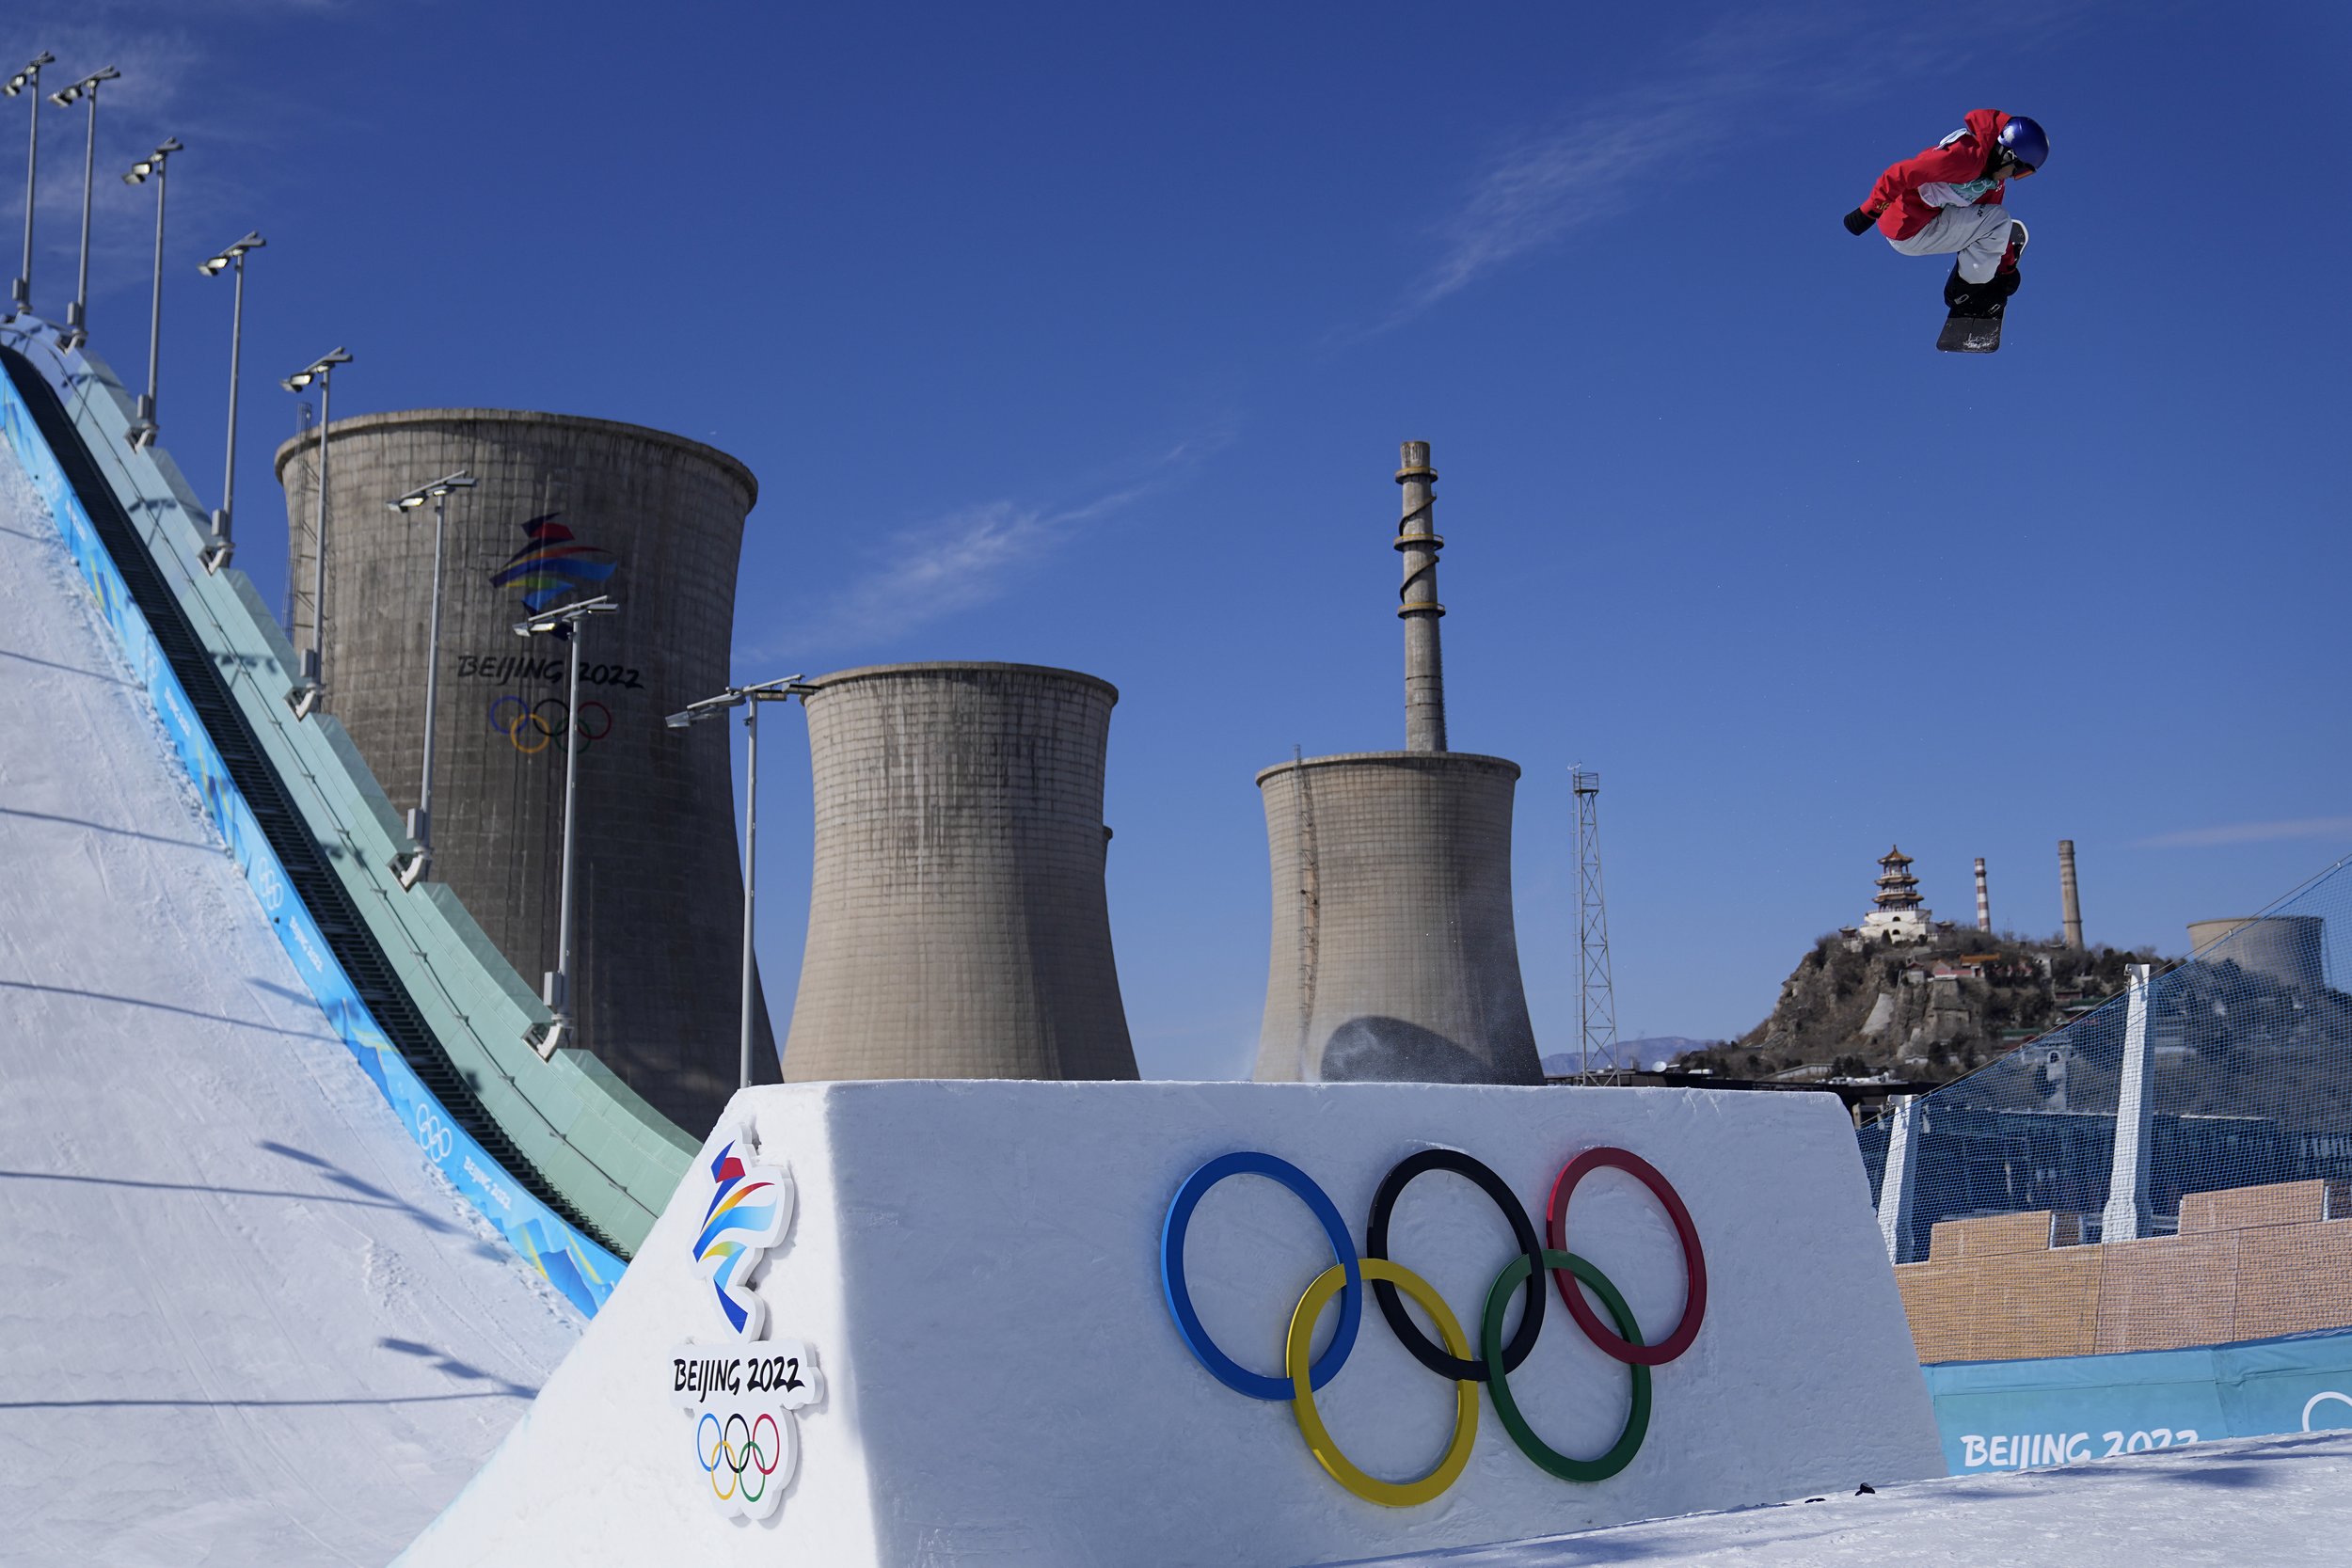  Takeru Otsuka of Japan competes during the men's snowboard big air qualifications of the 2022 Winter Olympics, Monday, Feb. 14, 2022, in Beijing. (AP Photo/Jae C. Hong) 